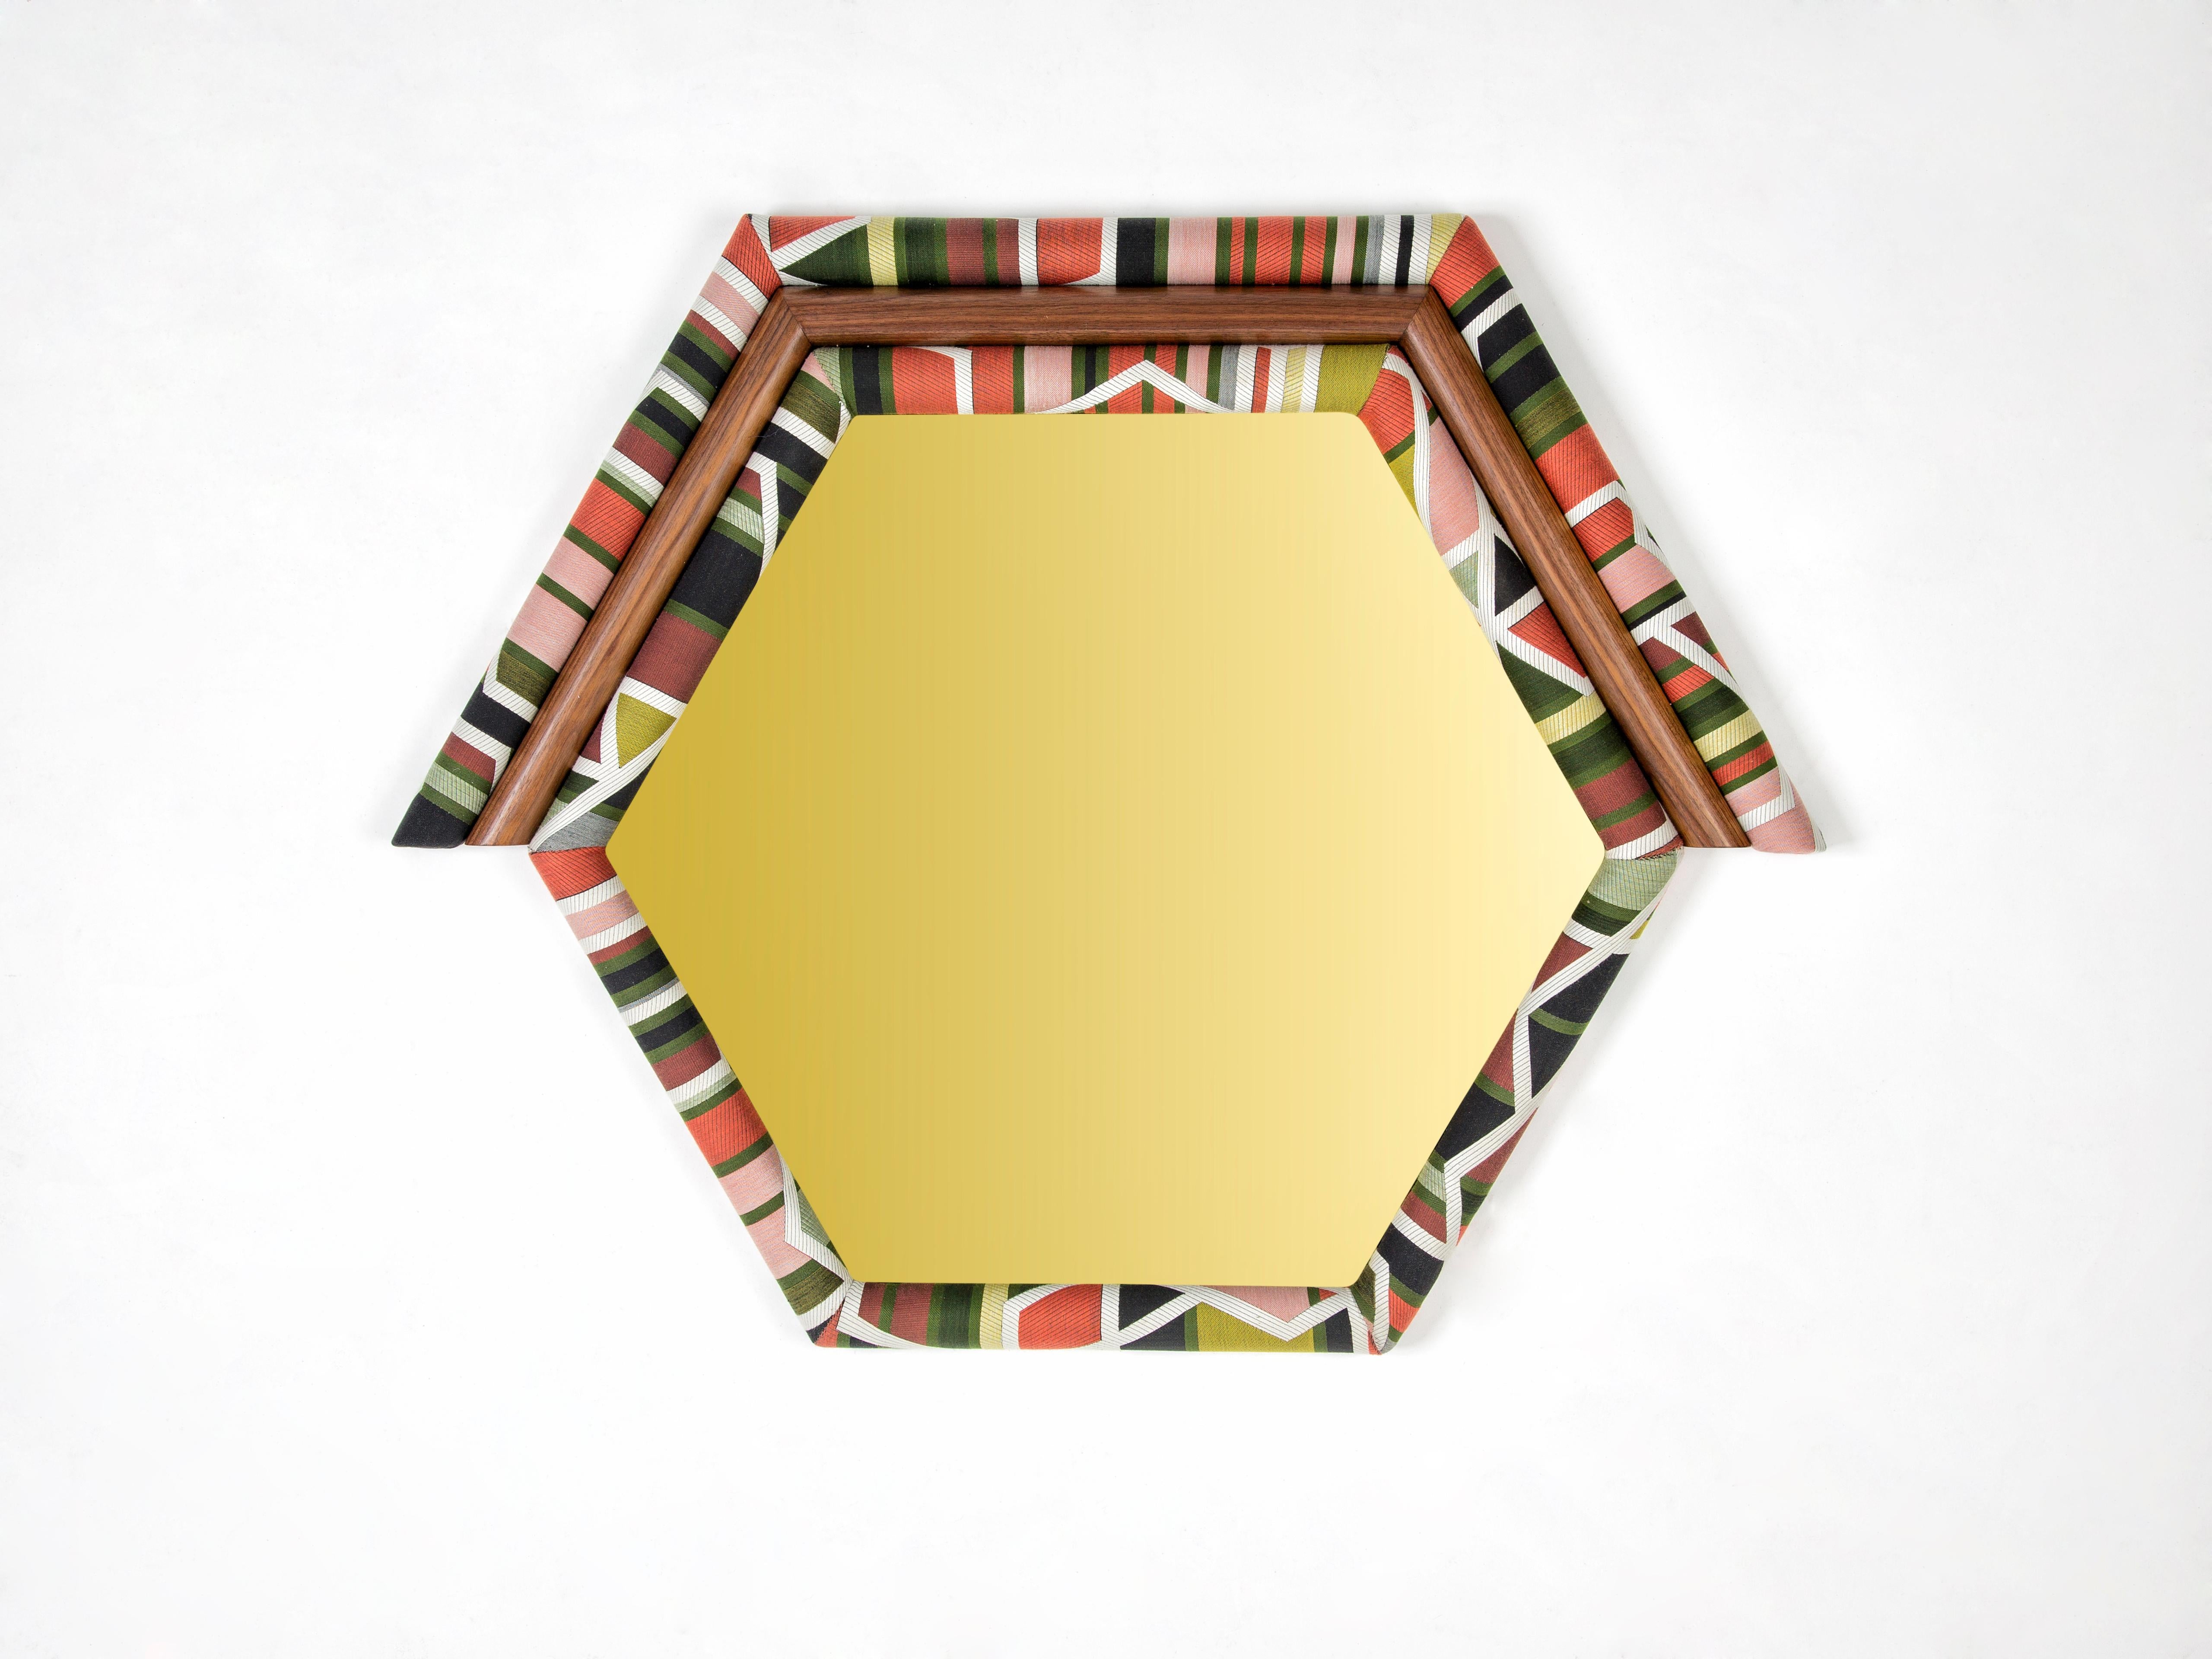 Turkish Contemporary Handcrafted Pontiac Triangle Mirror with Paul Smith Upholstery For Sale